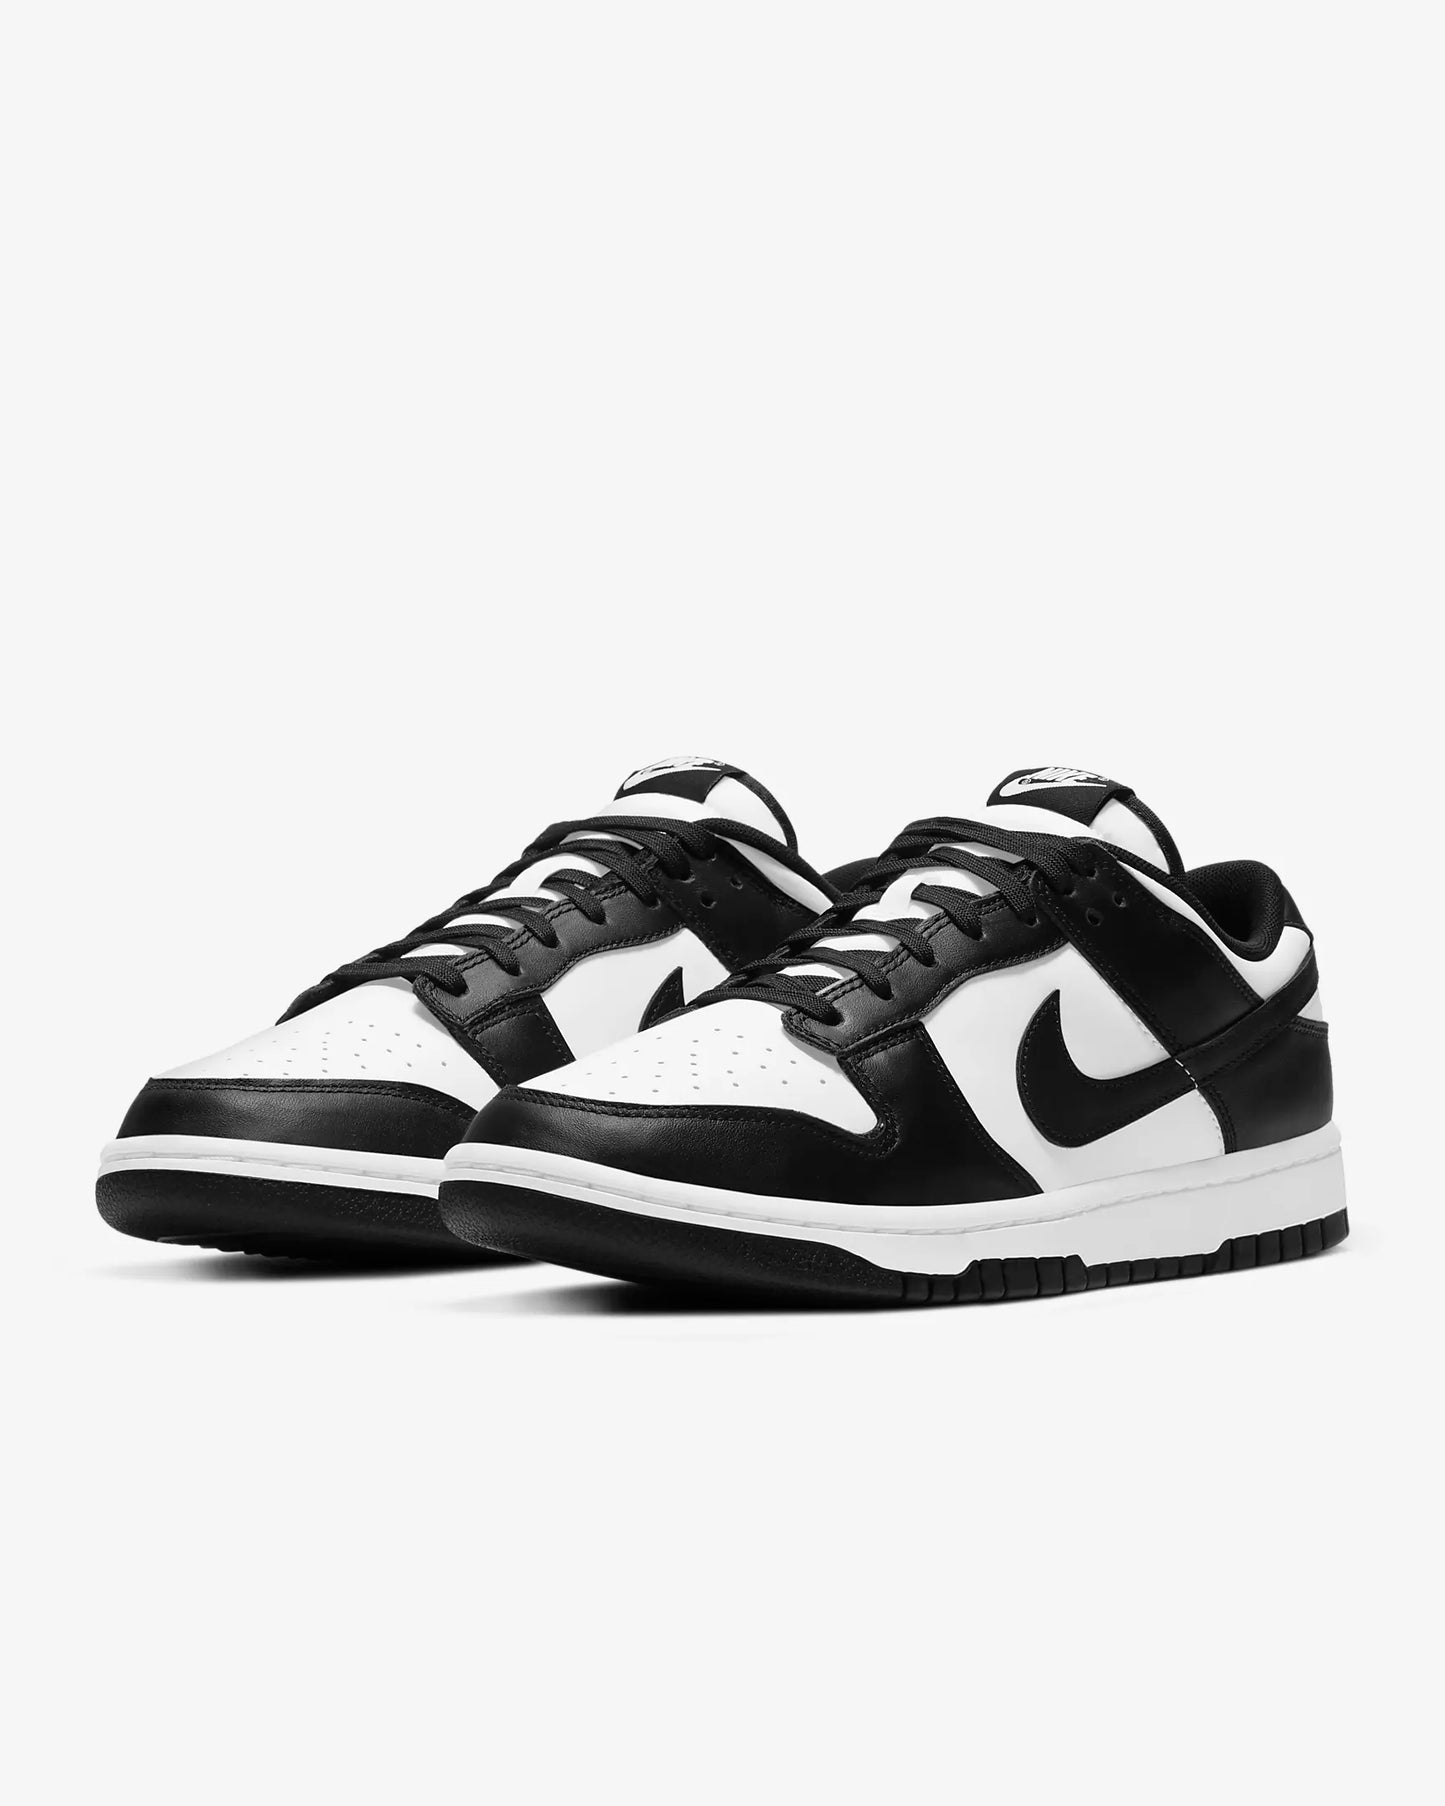 Nike Sb Dunk Black White(Brand New) (Originals)(Pre-Orders Only)